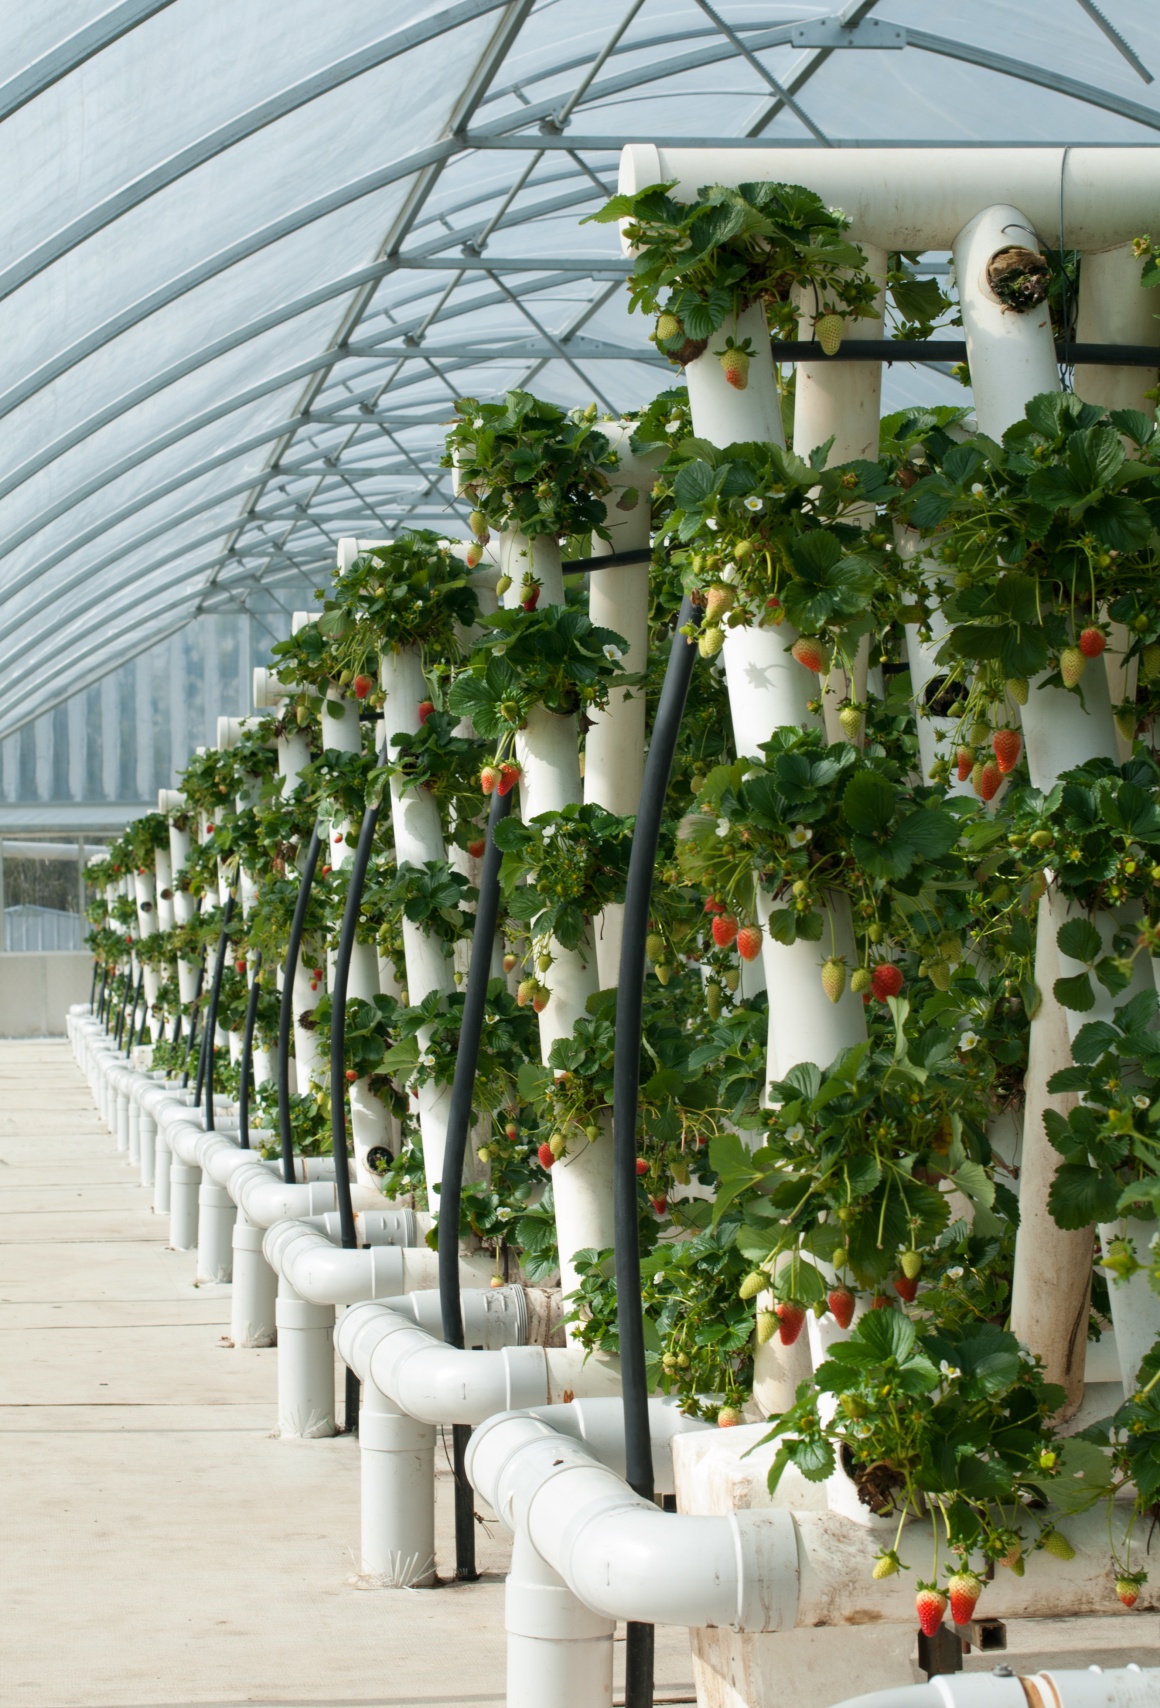 A greenhouse with vertical rails on which plants grow...